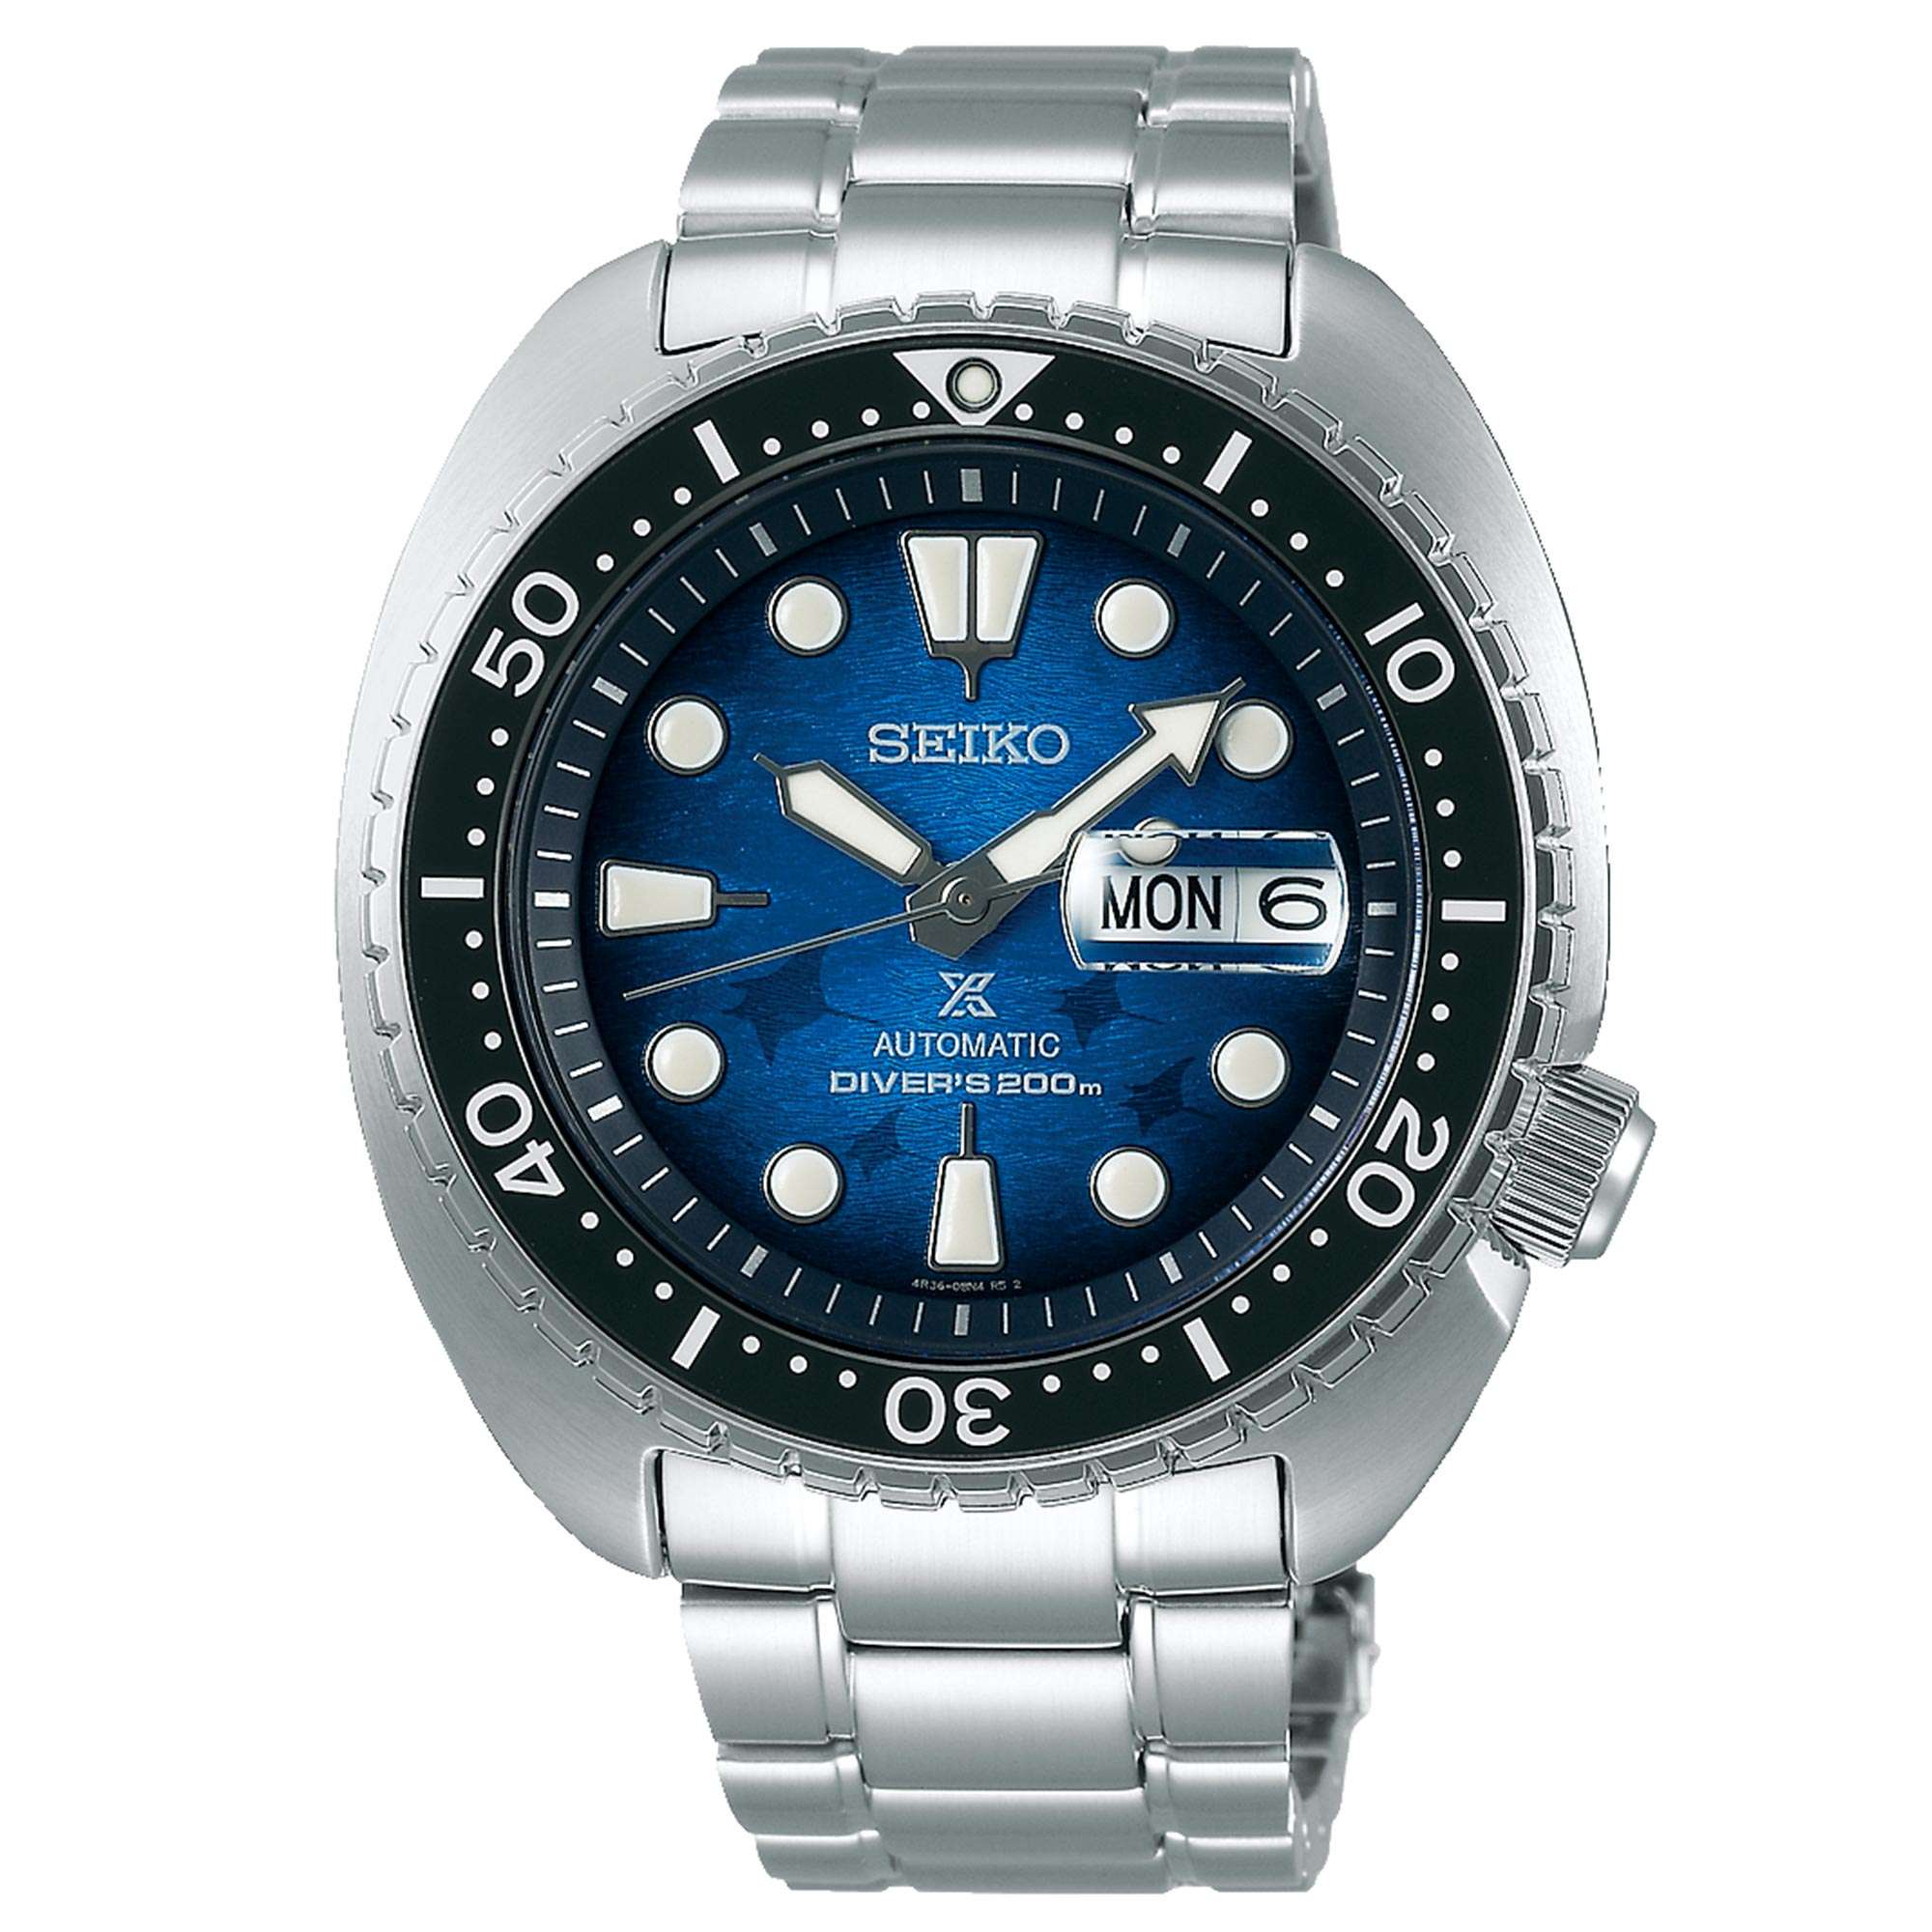 Seiko Divers Watches: Overnight Delivery & 2 Year Warranty